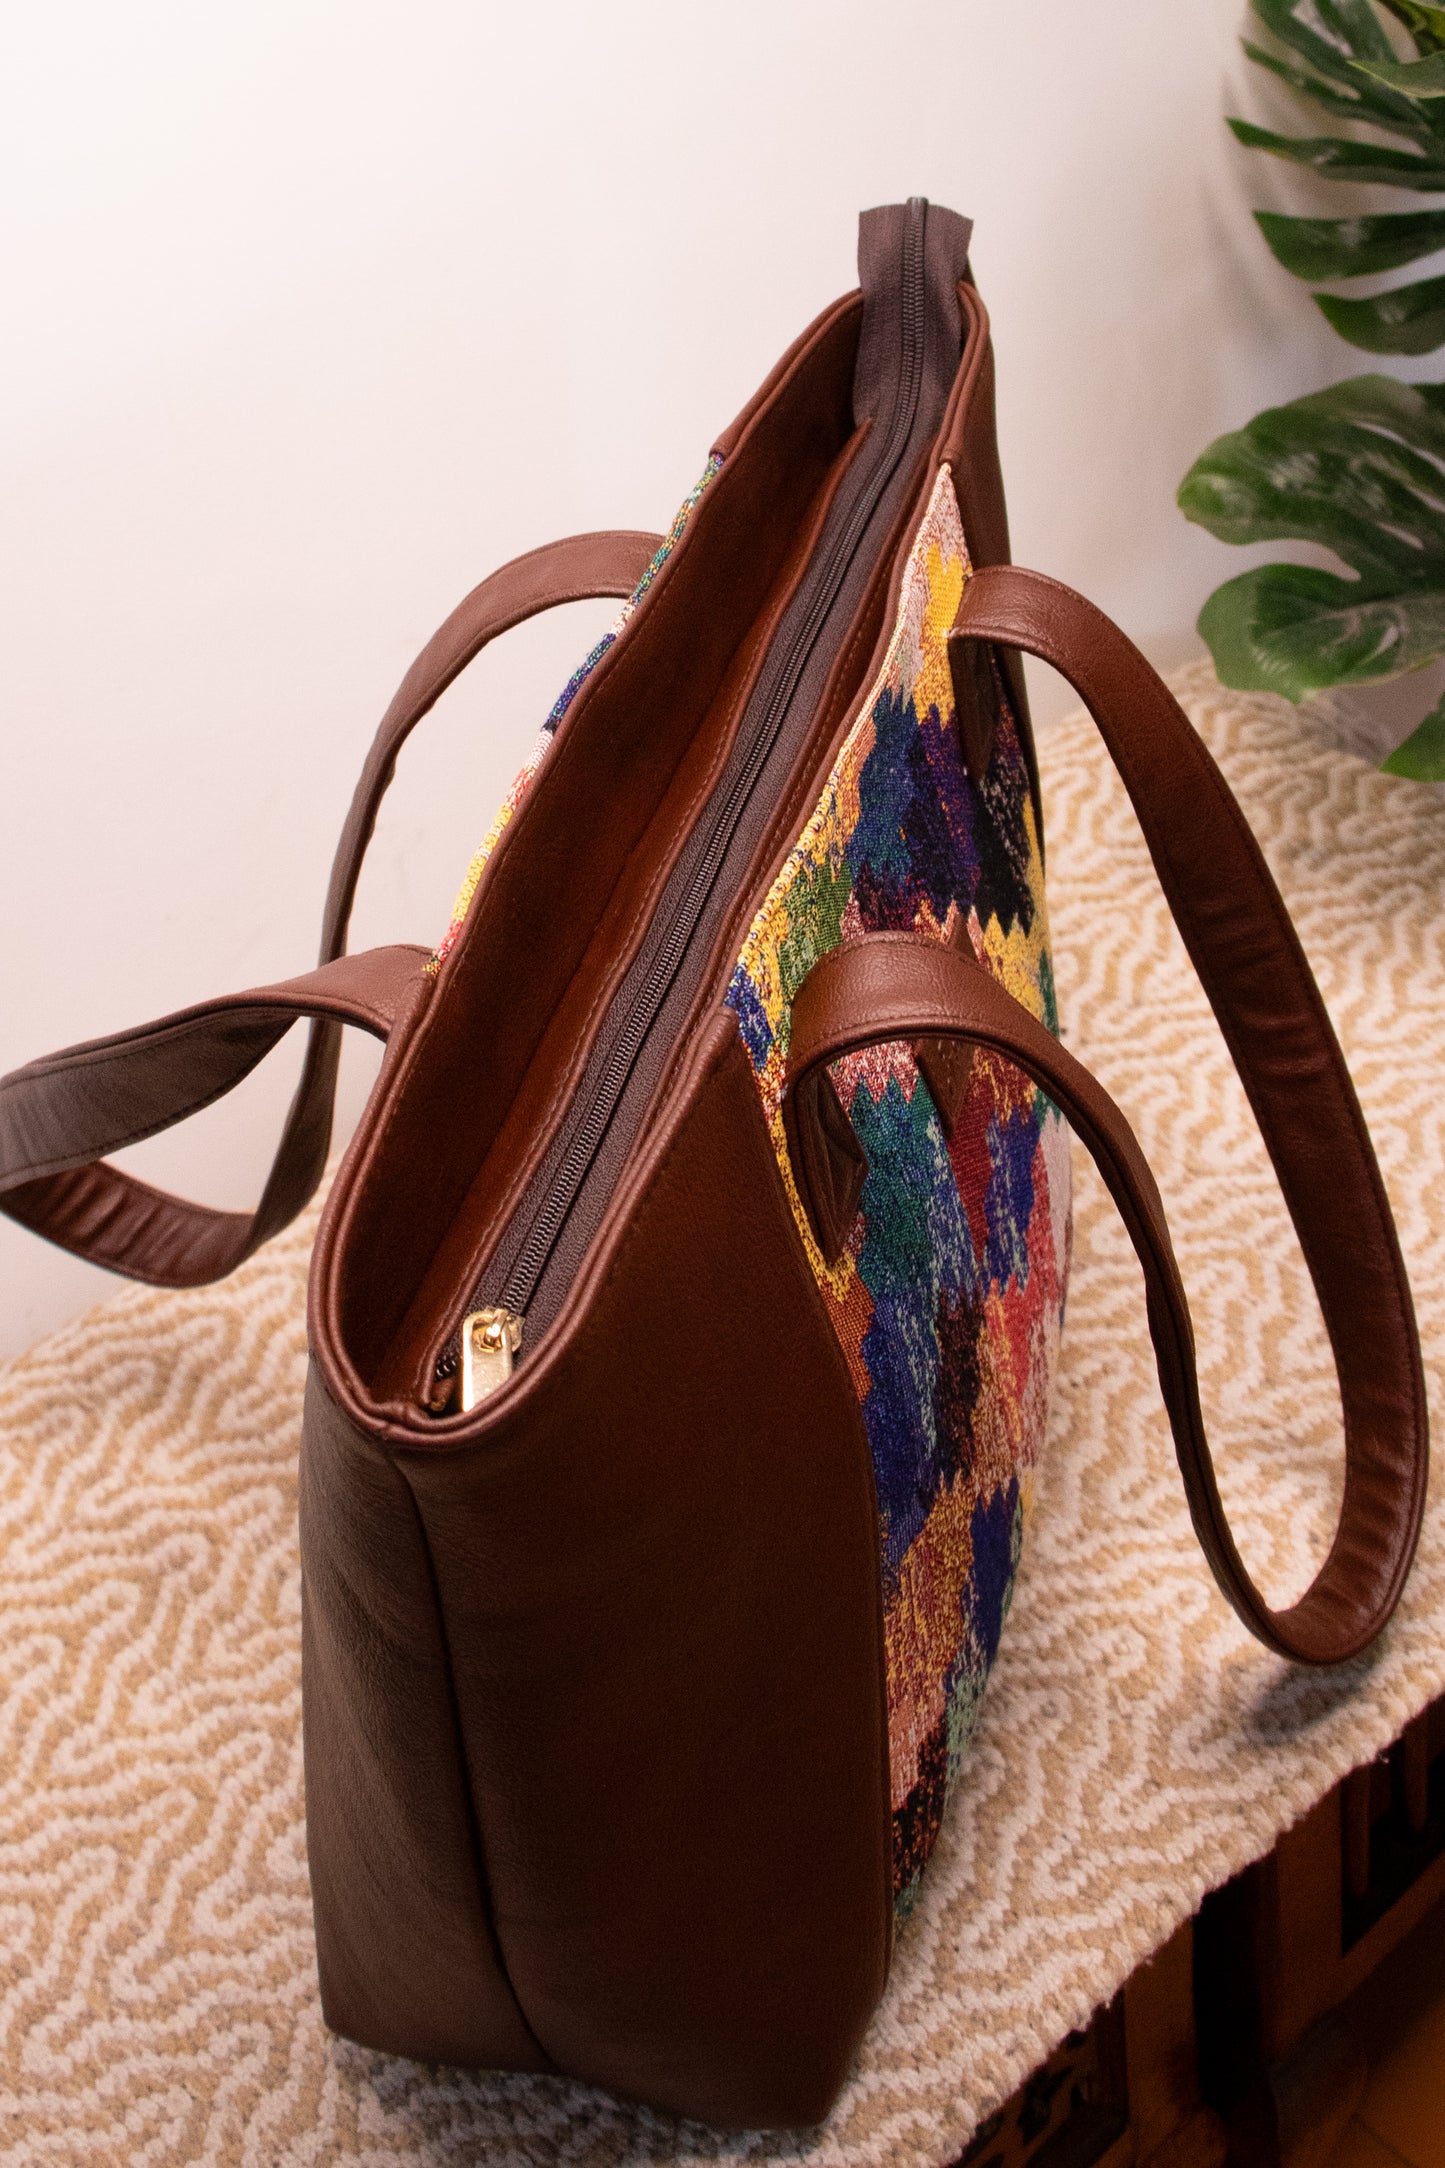 Carry Your World Tote - Earthy